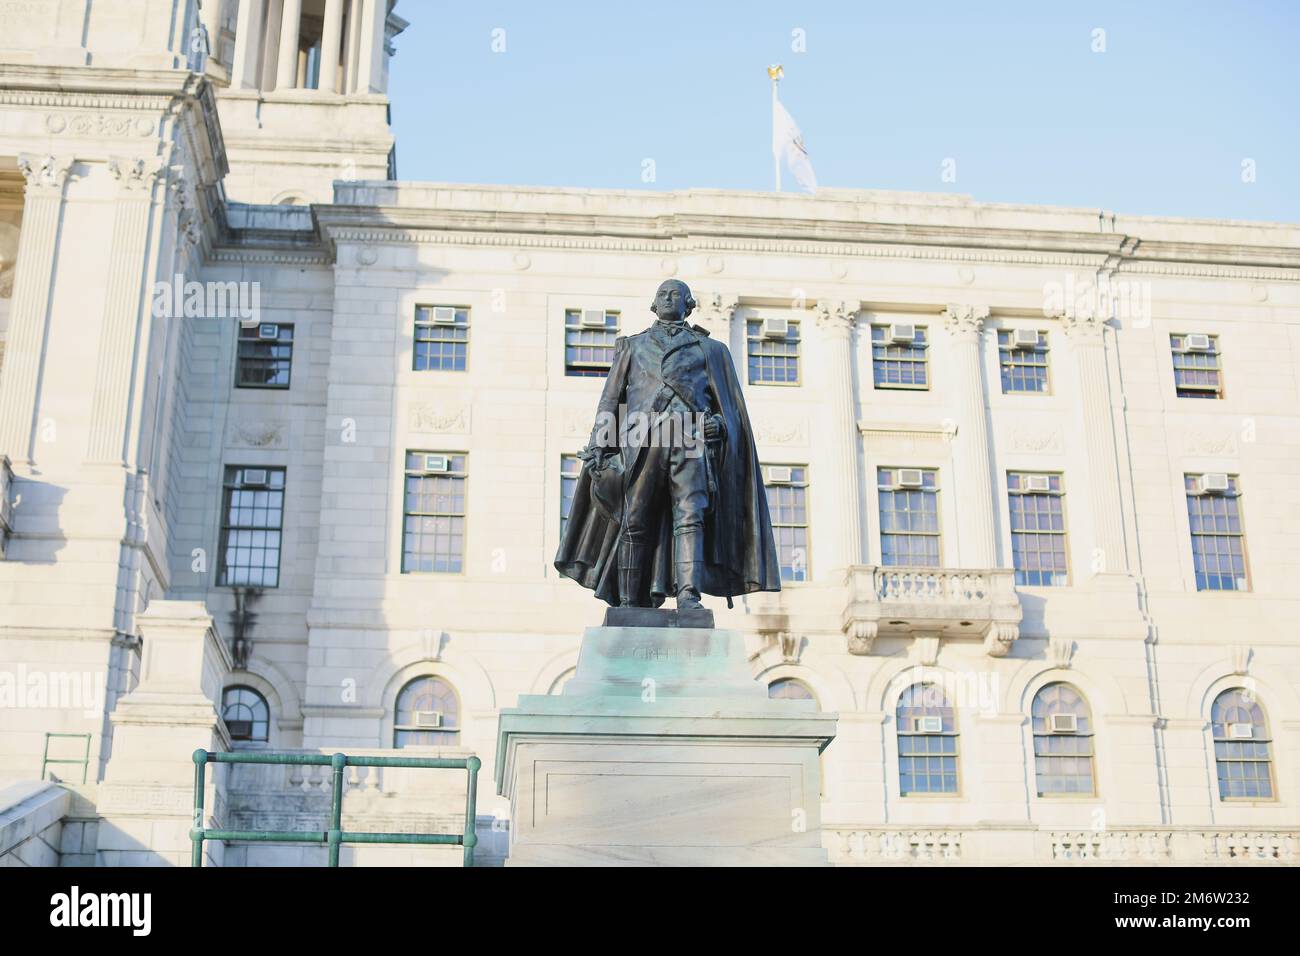 Rhode Island State House historical monument building capitol during sunset landmark national city and history Stock Photo